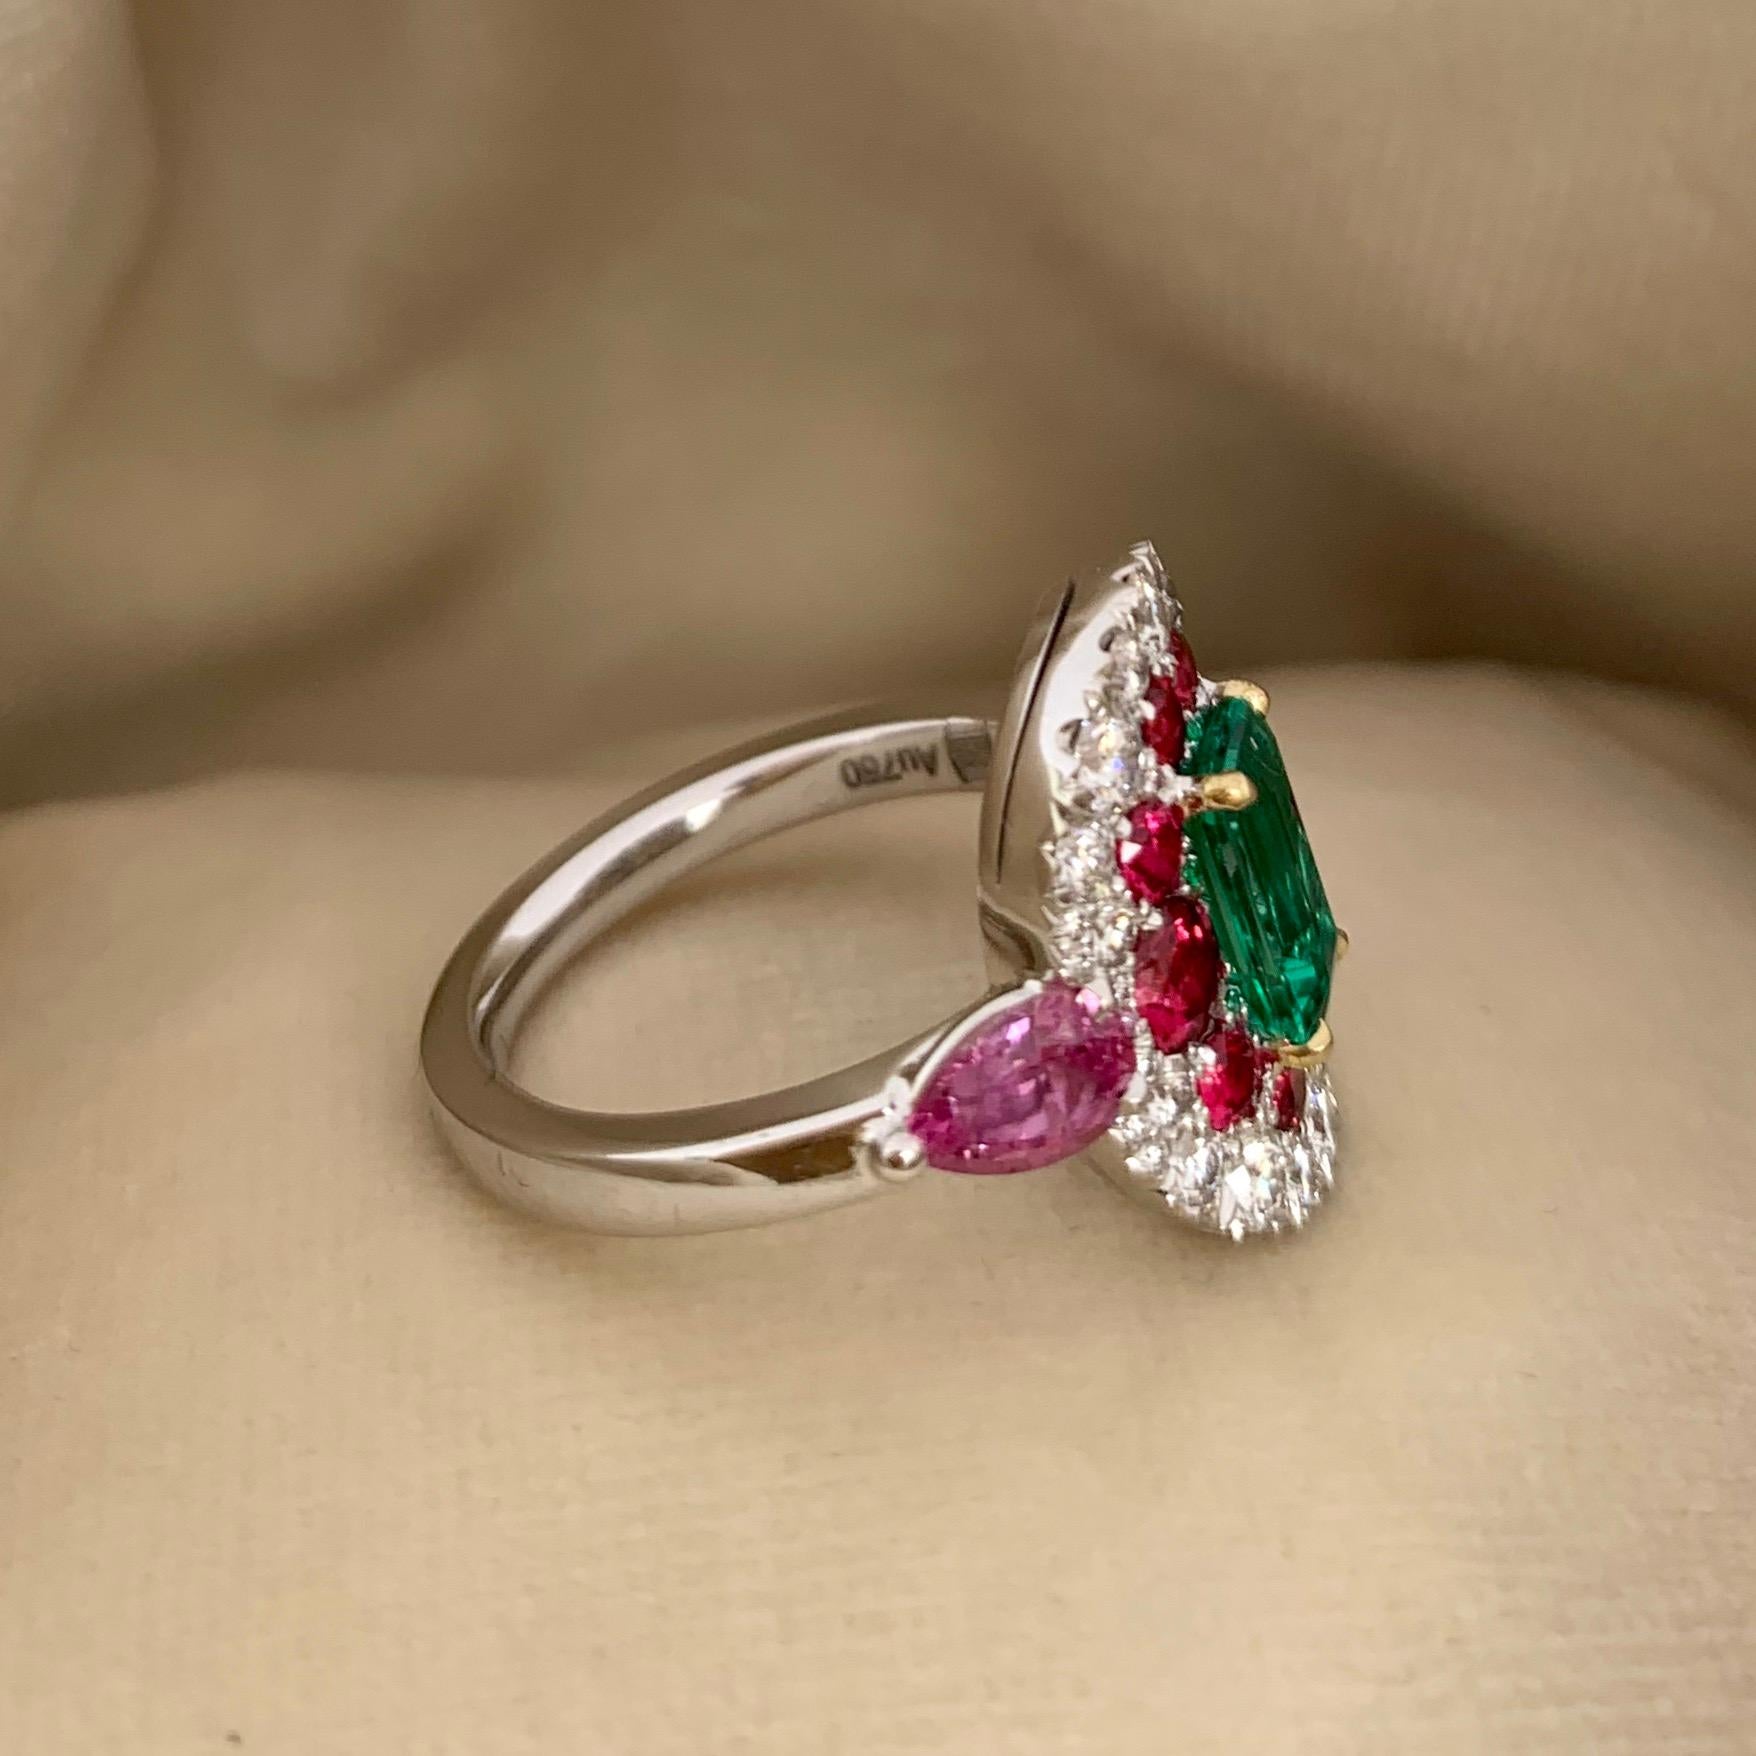 Emerald Cut 1.10 Carat Emerald, Red Spinel and Pink Sapphire Ring For Sale